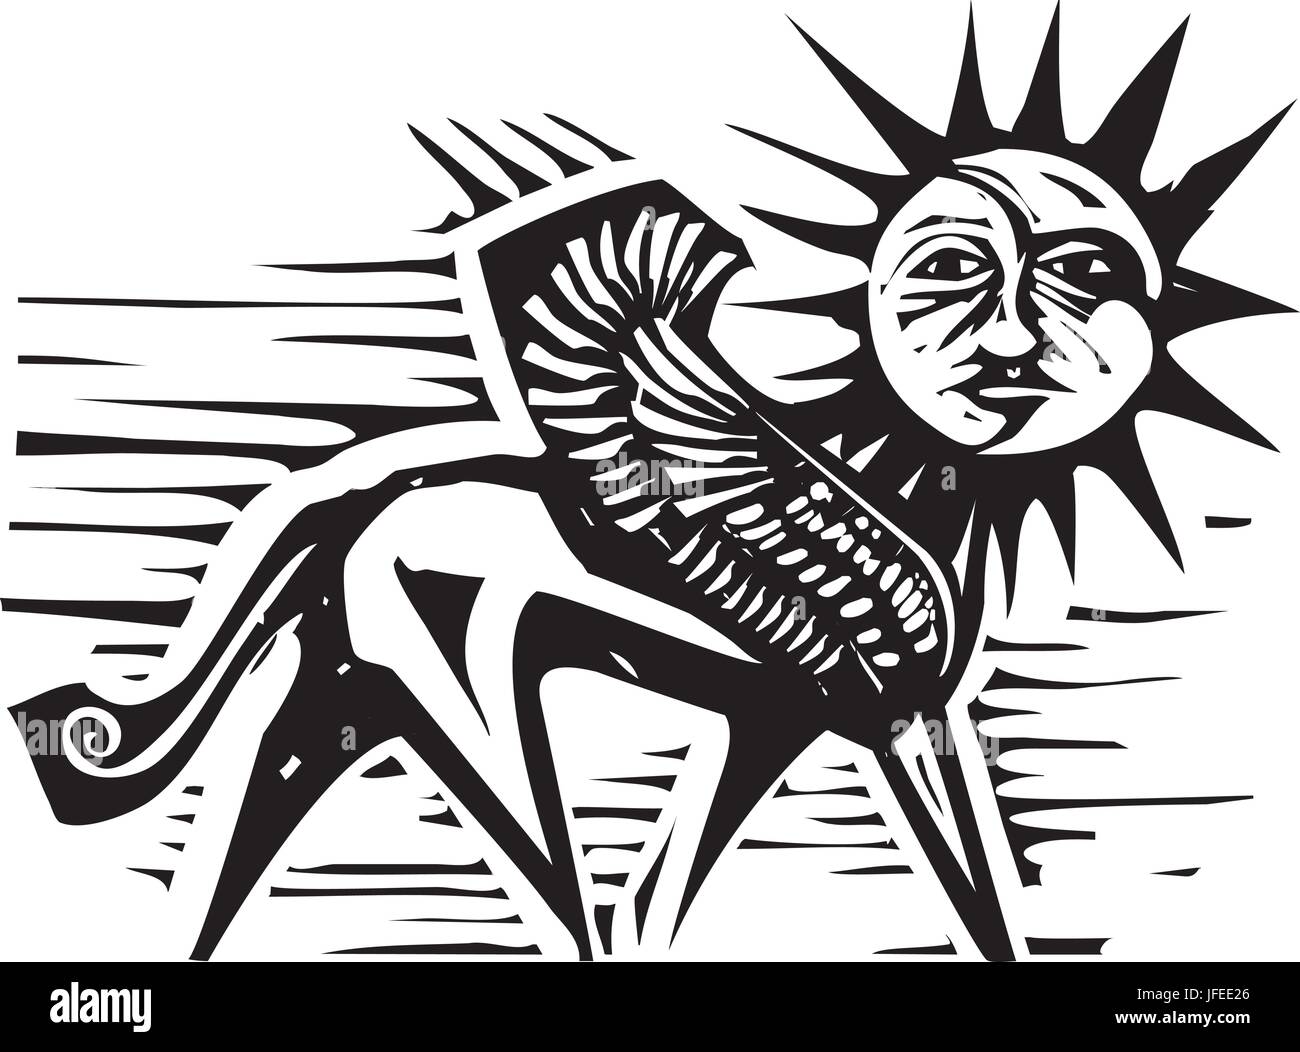 Woodcut style image of a sun and moon face on the body of a griffin Stock Vector